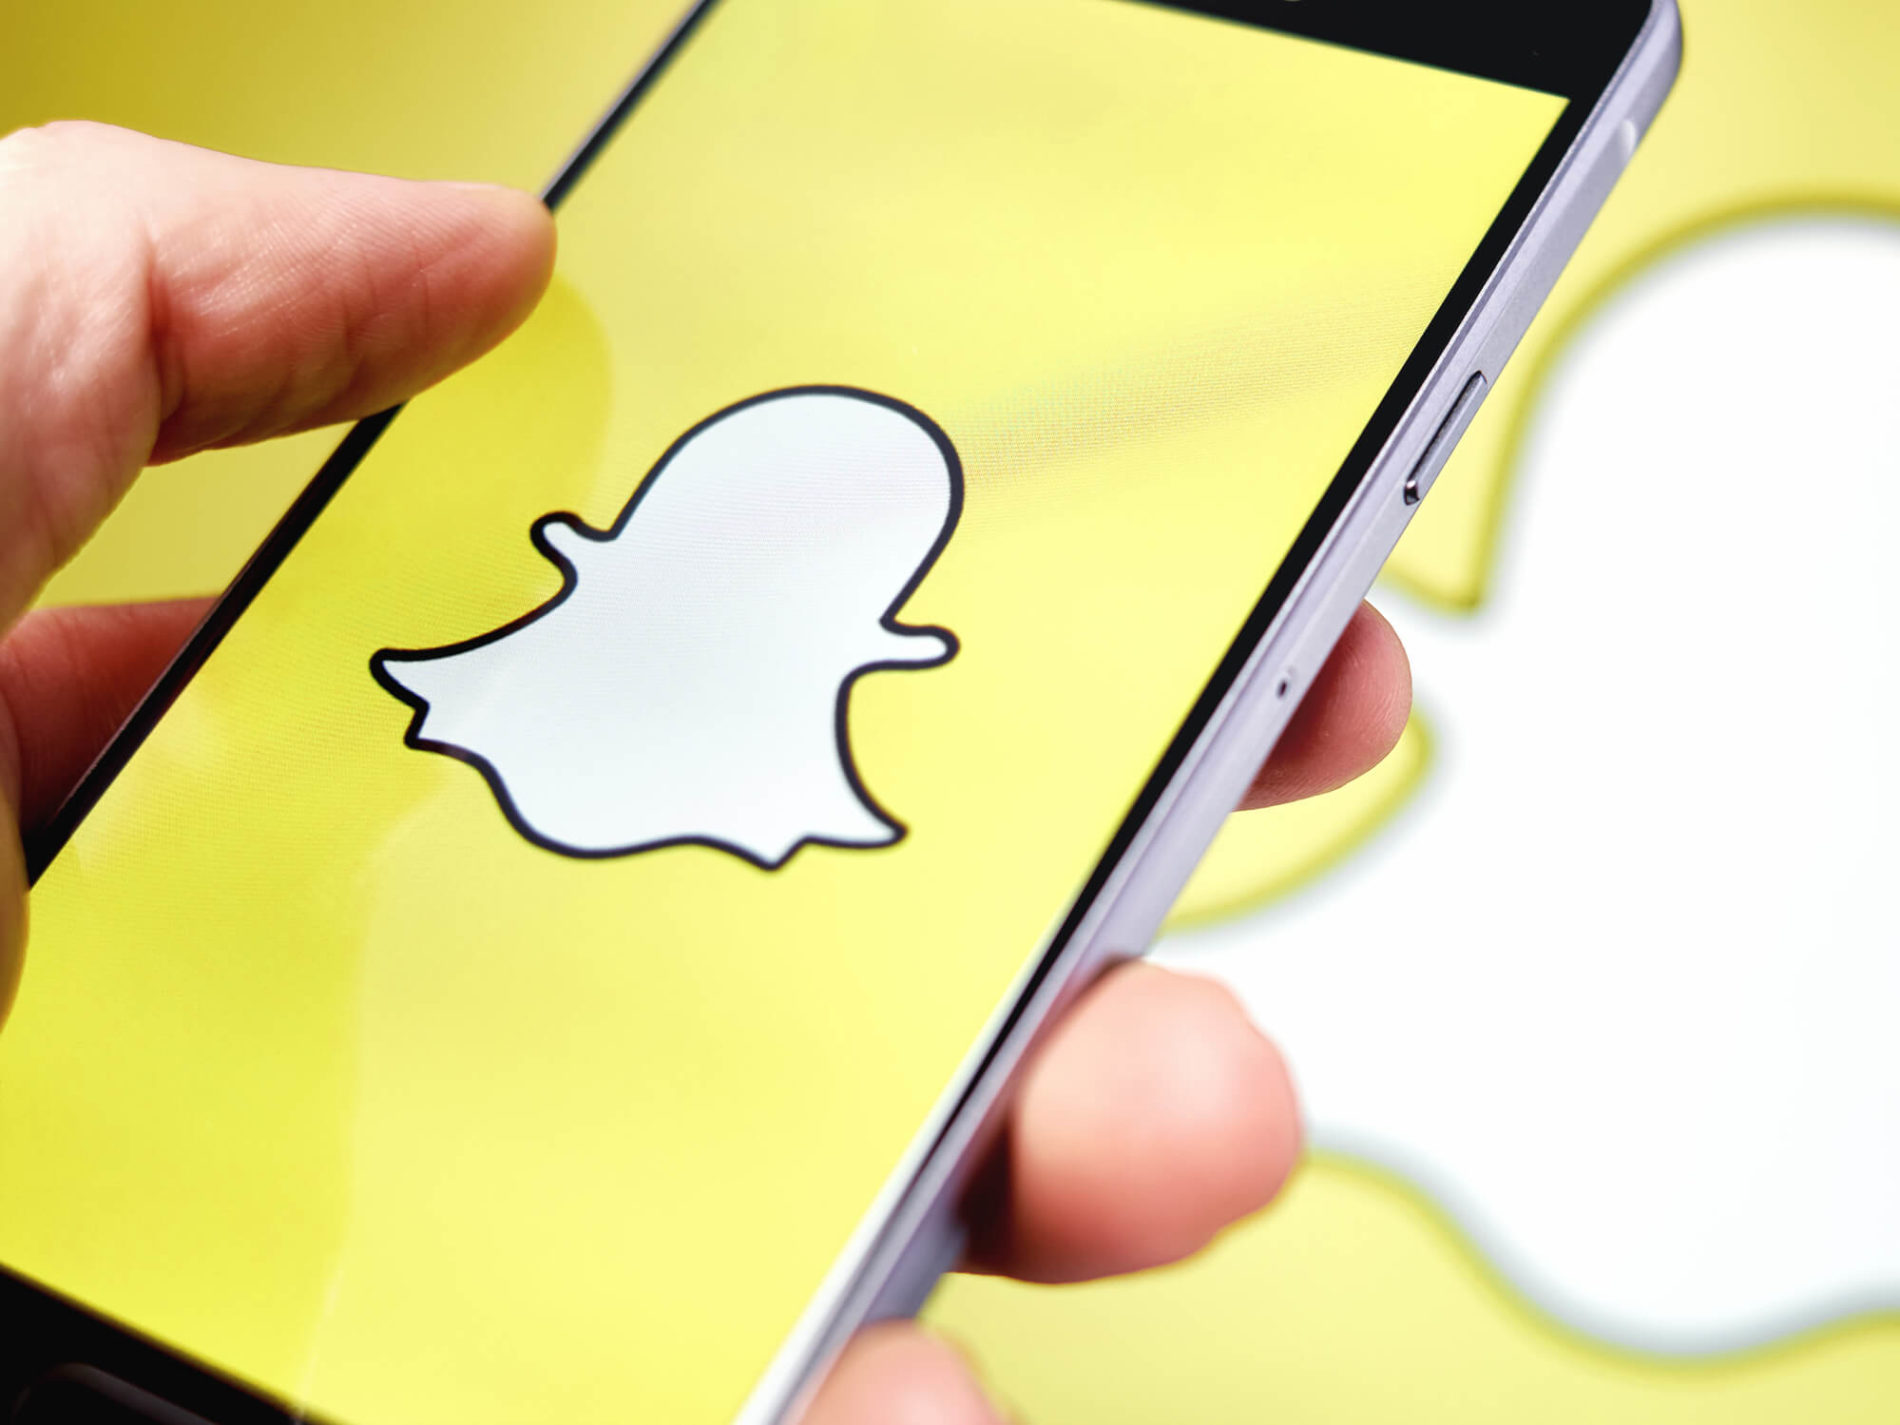 A Potential Snapchat Change that Your Dental Practice Should Watch 